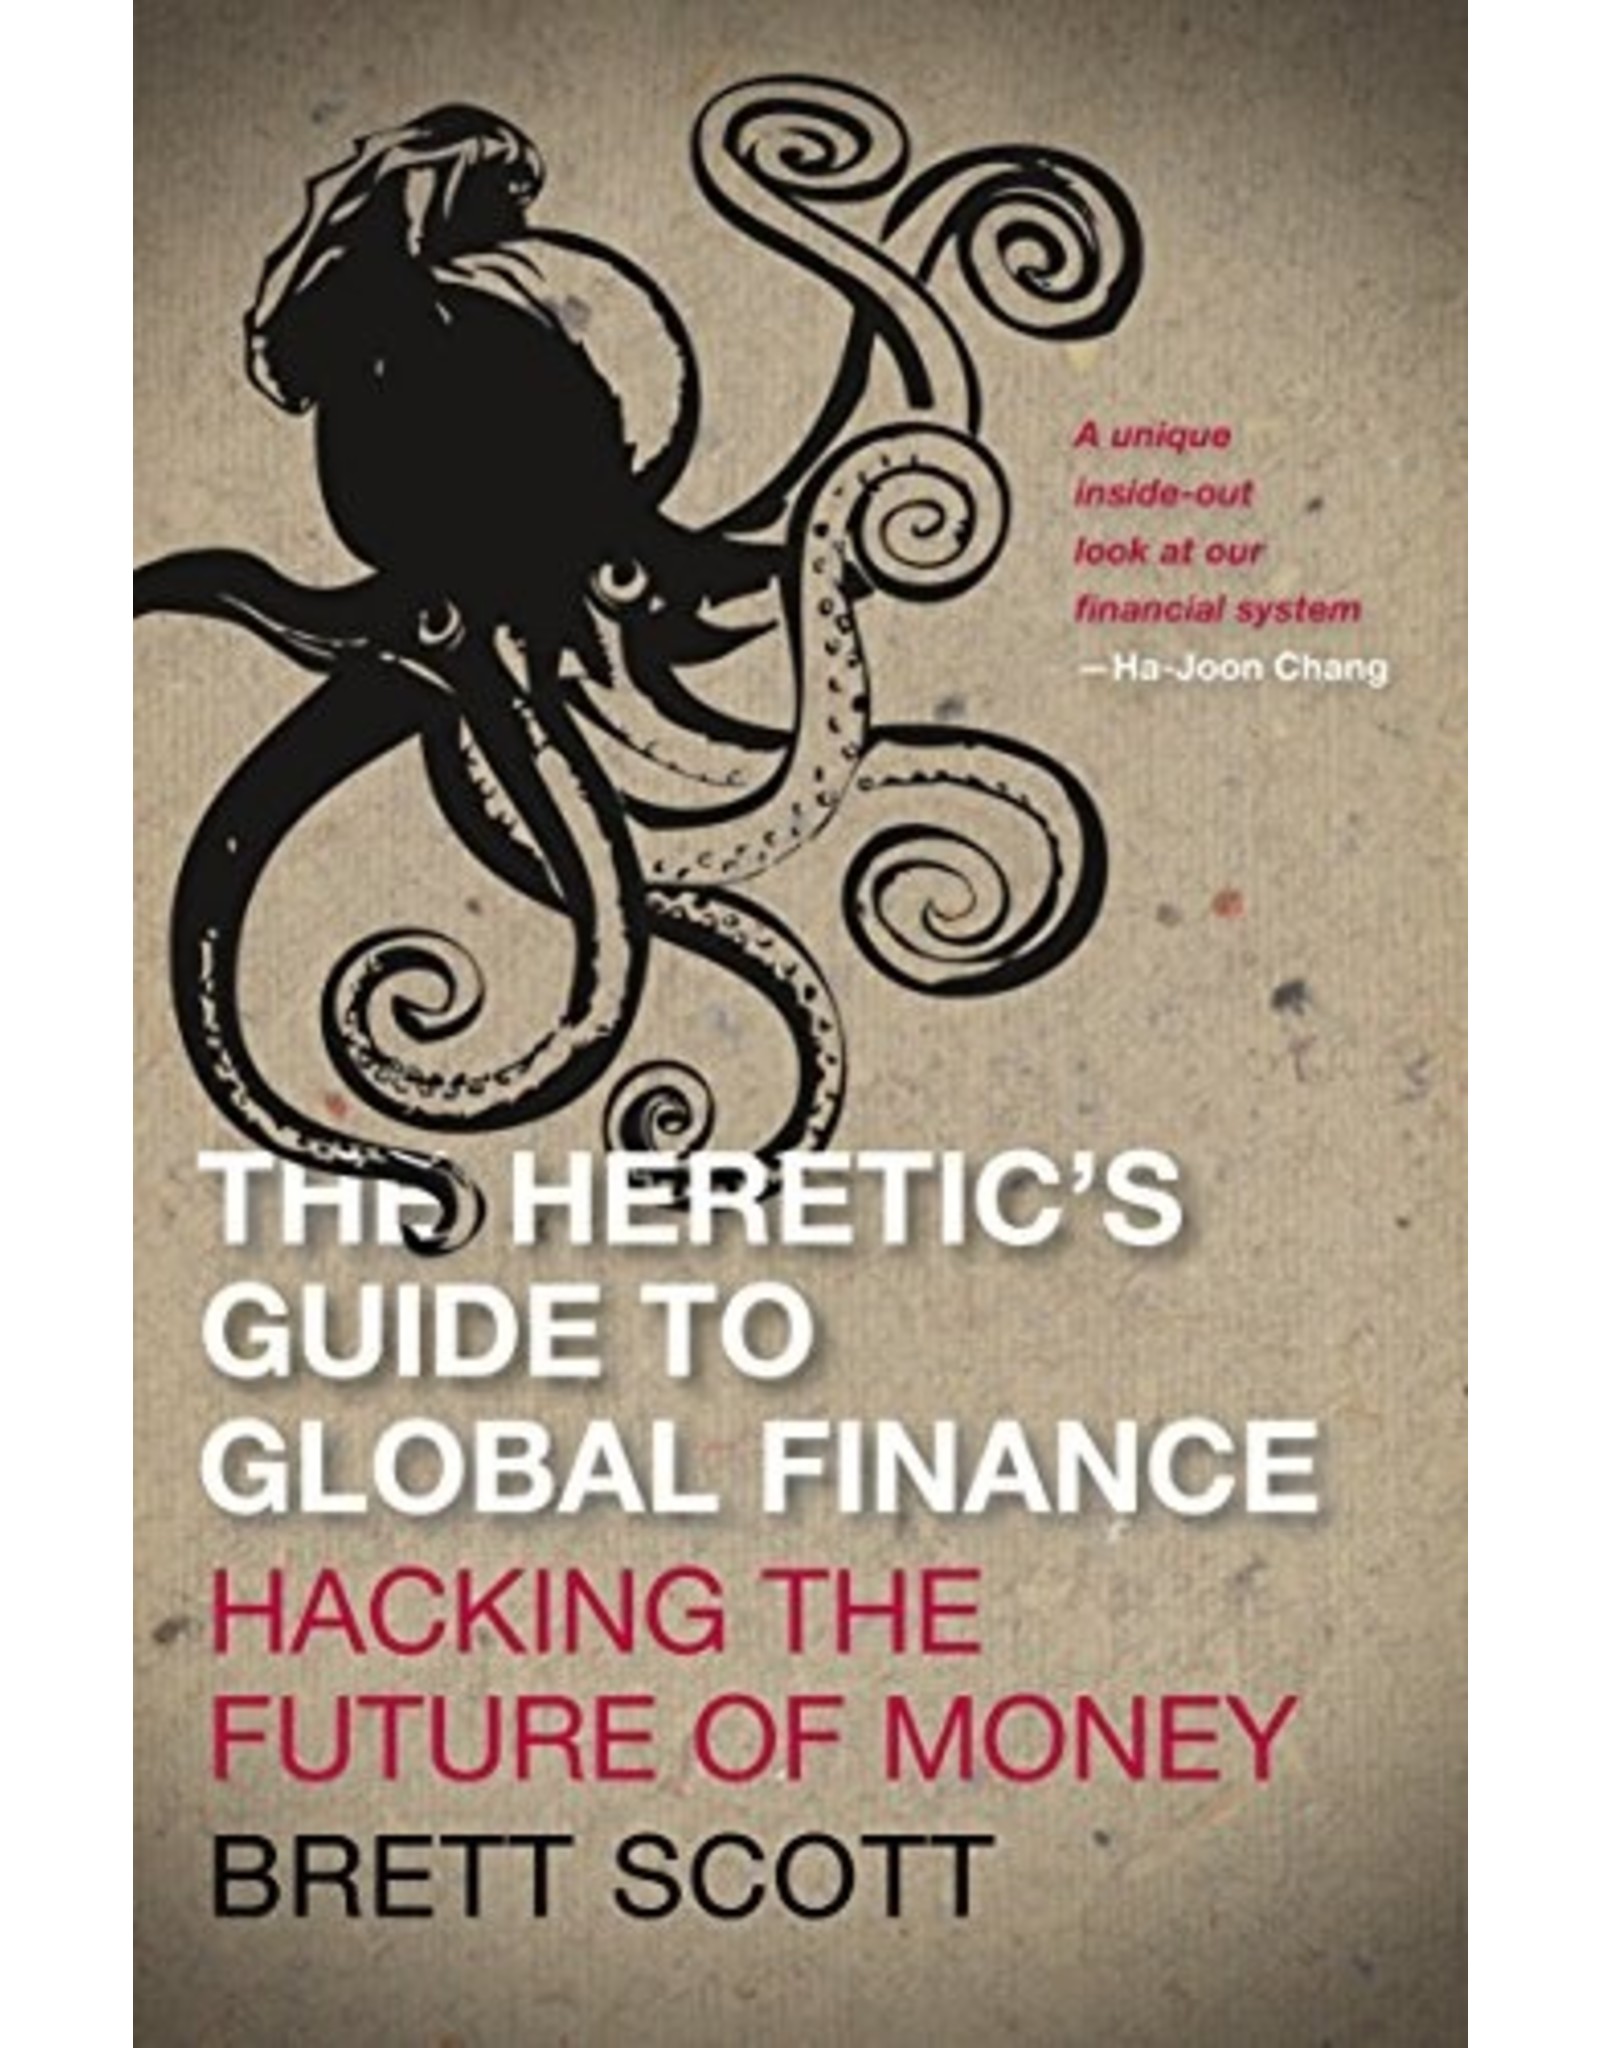 Literature Heretic’s Guide to Global Finance